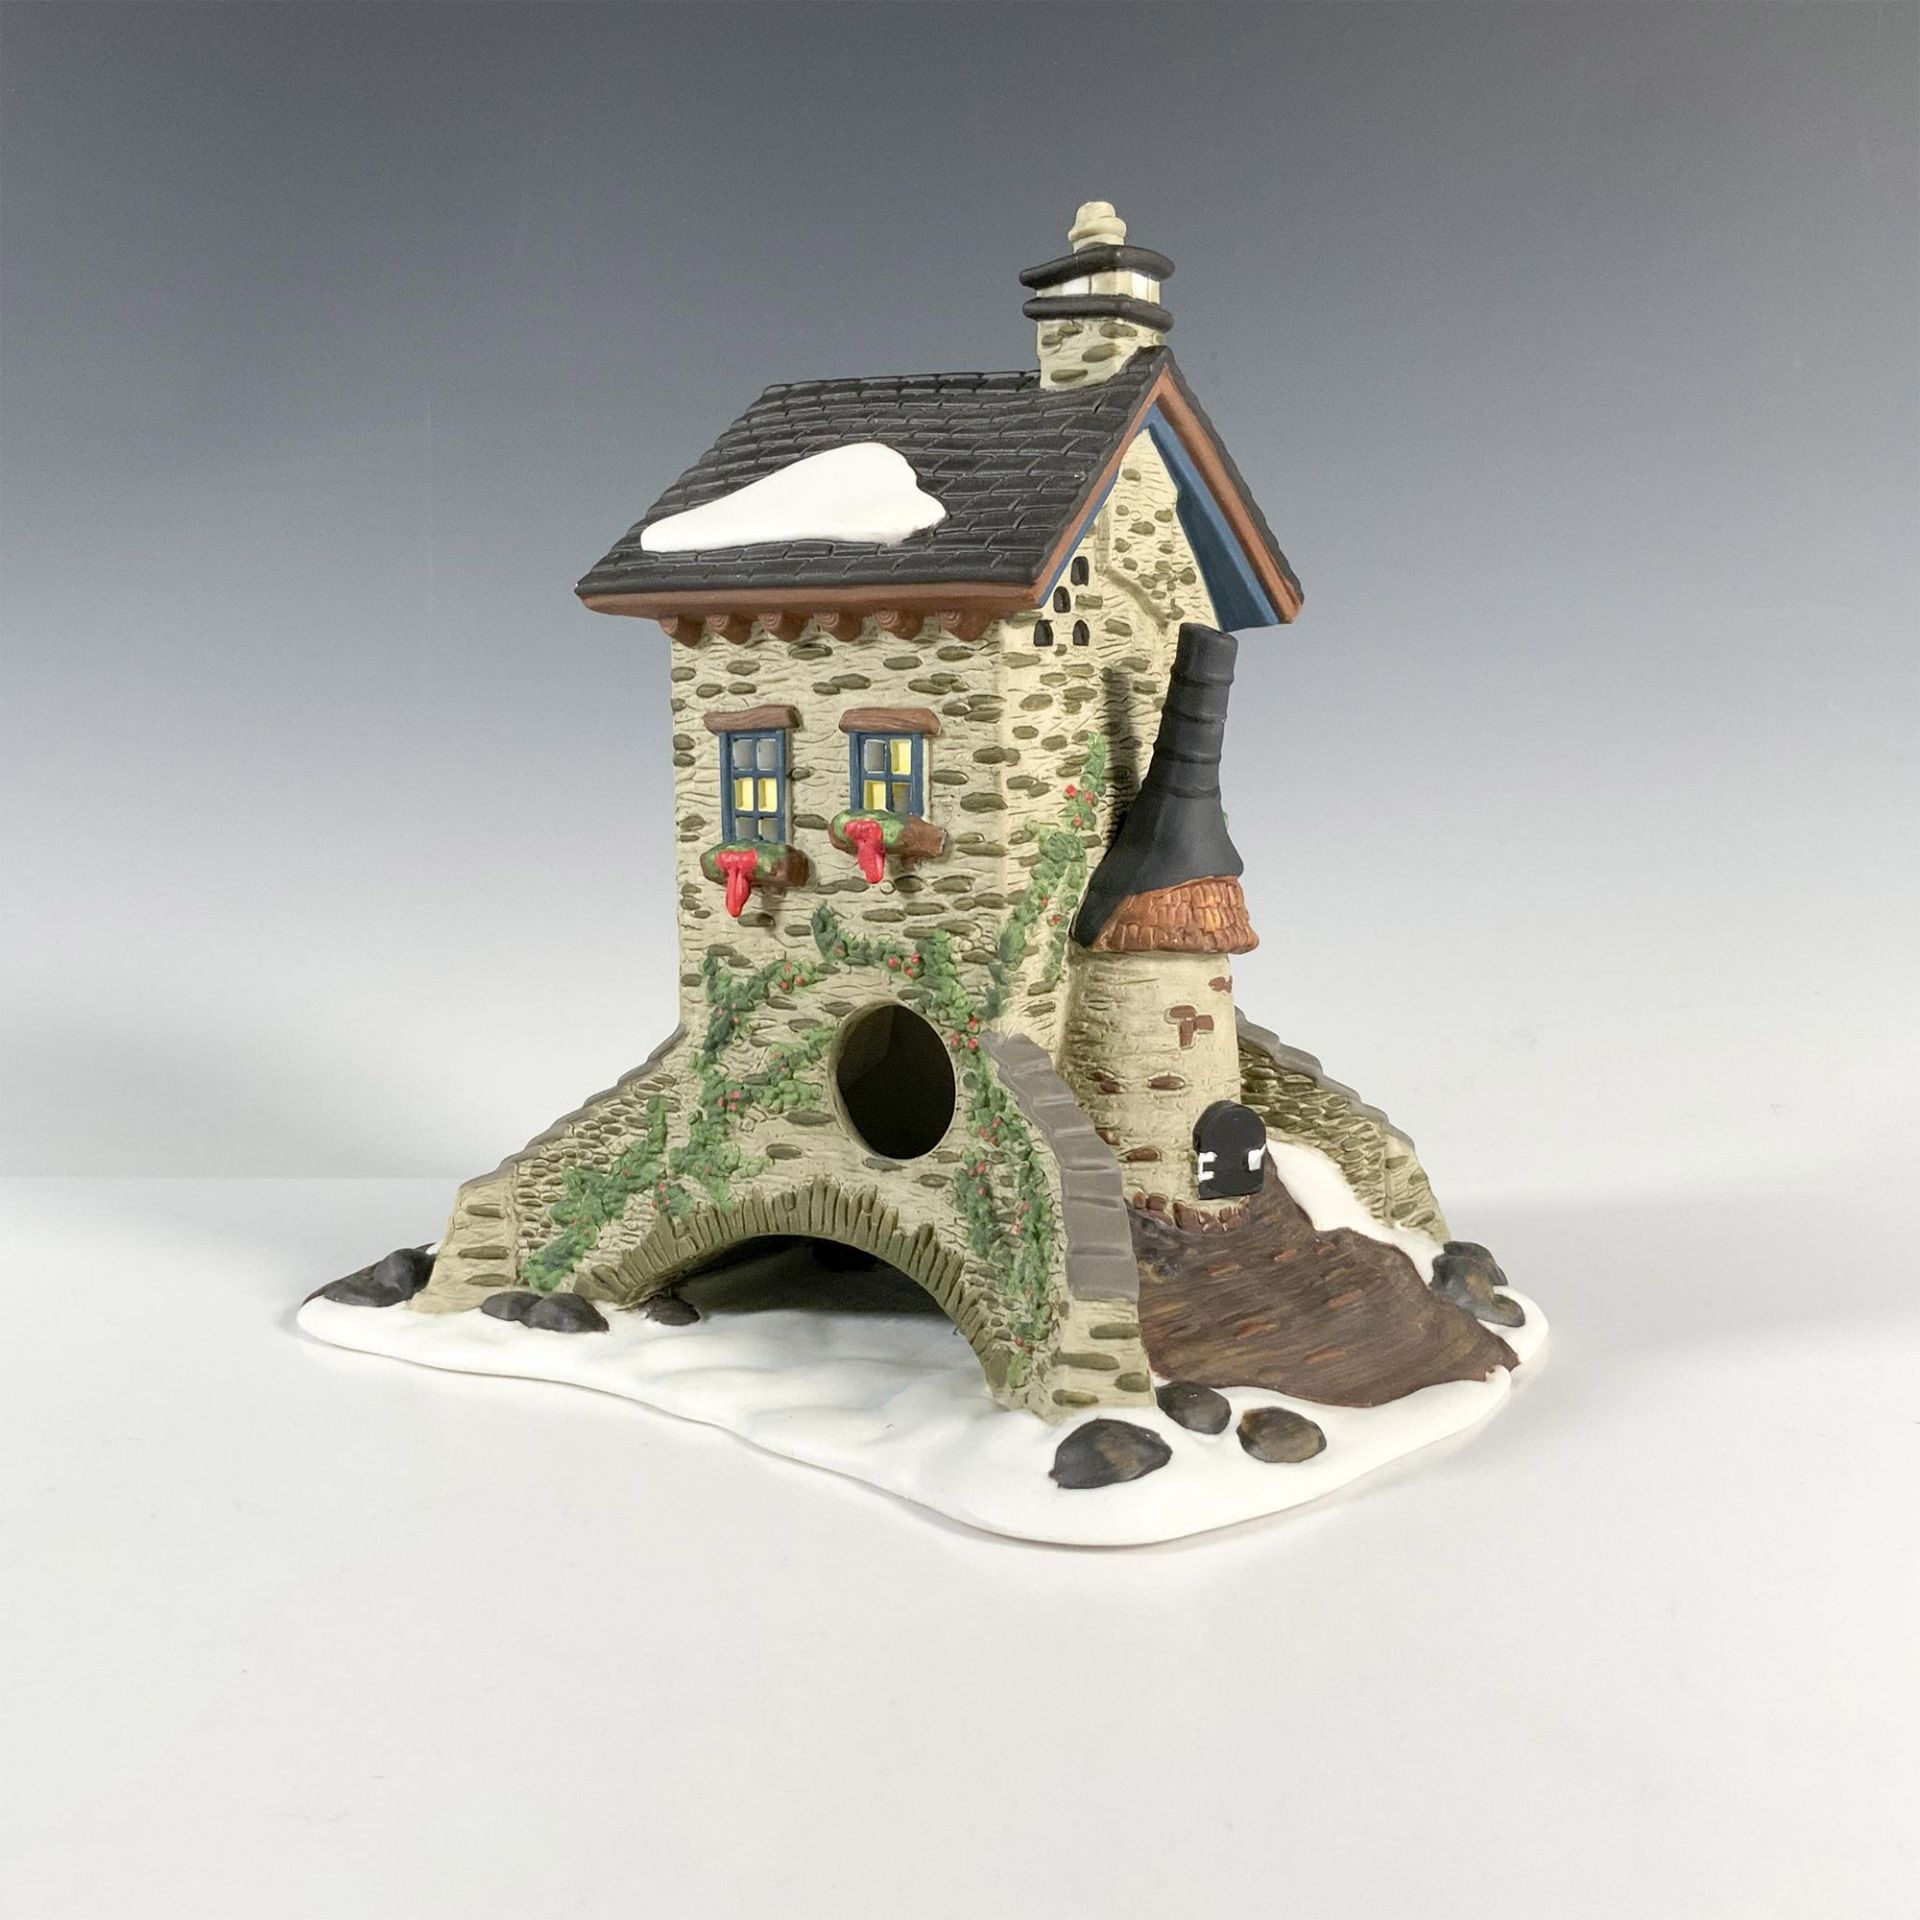 Department 56 Dickens Village Figurine, The Maltings - Image 2 of 4